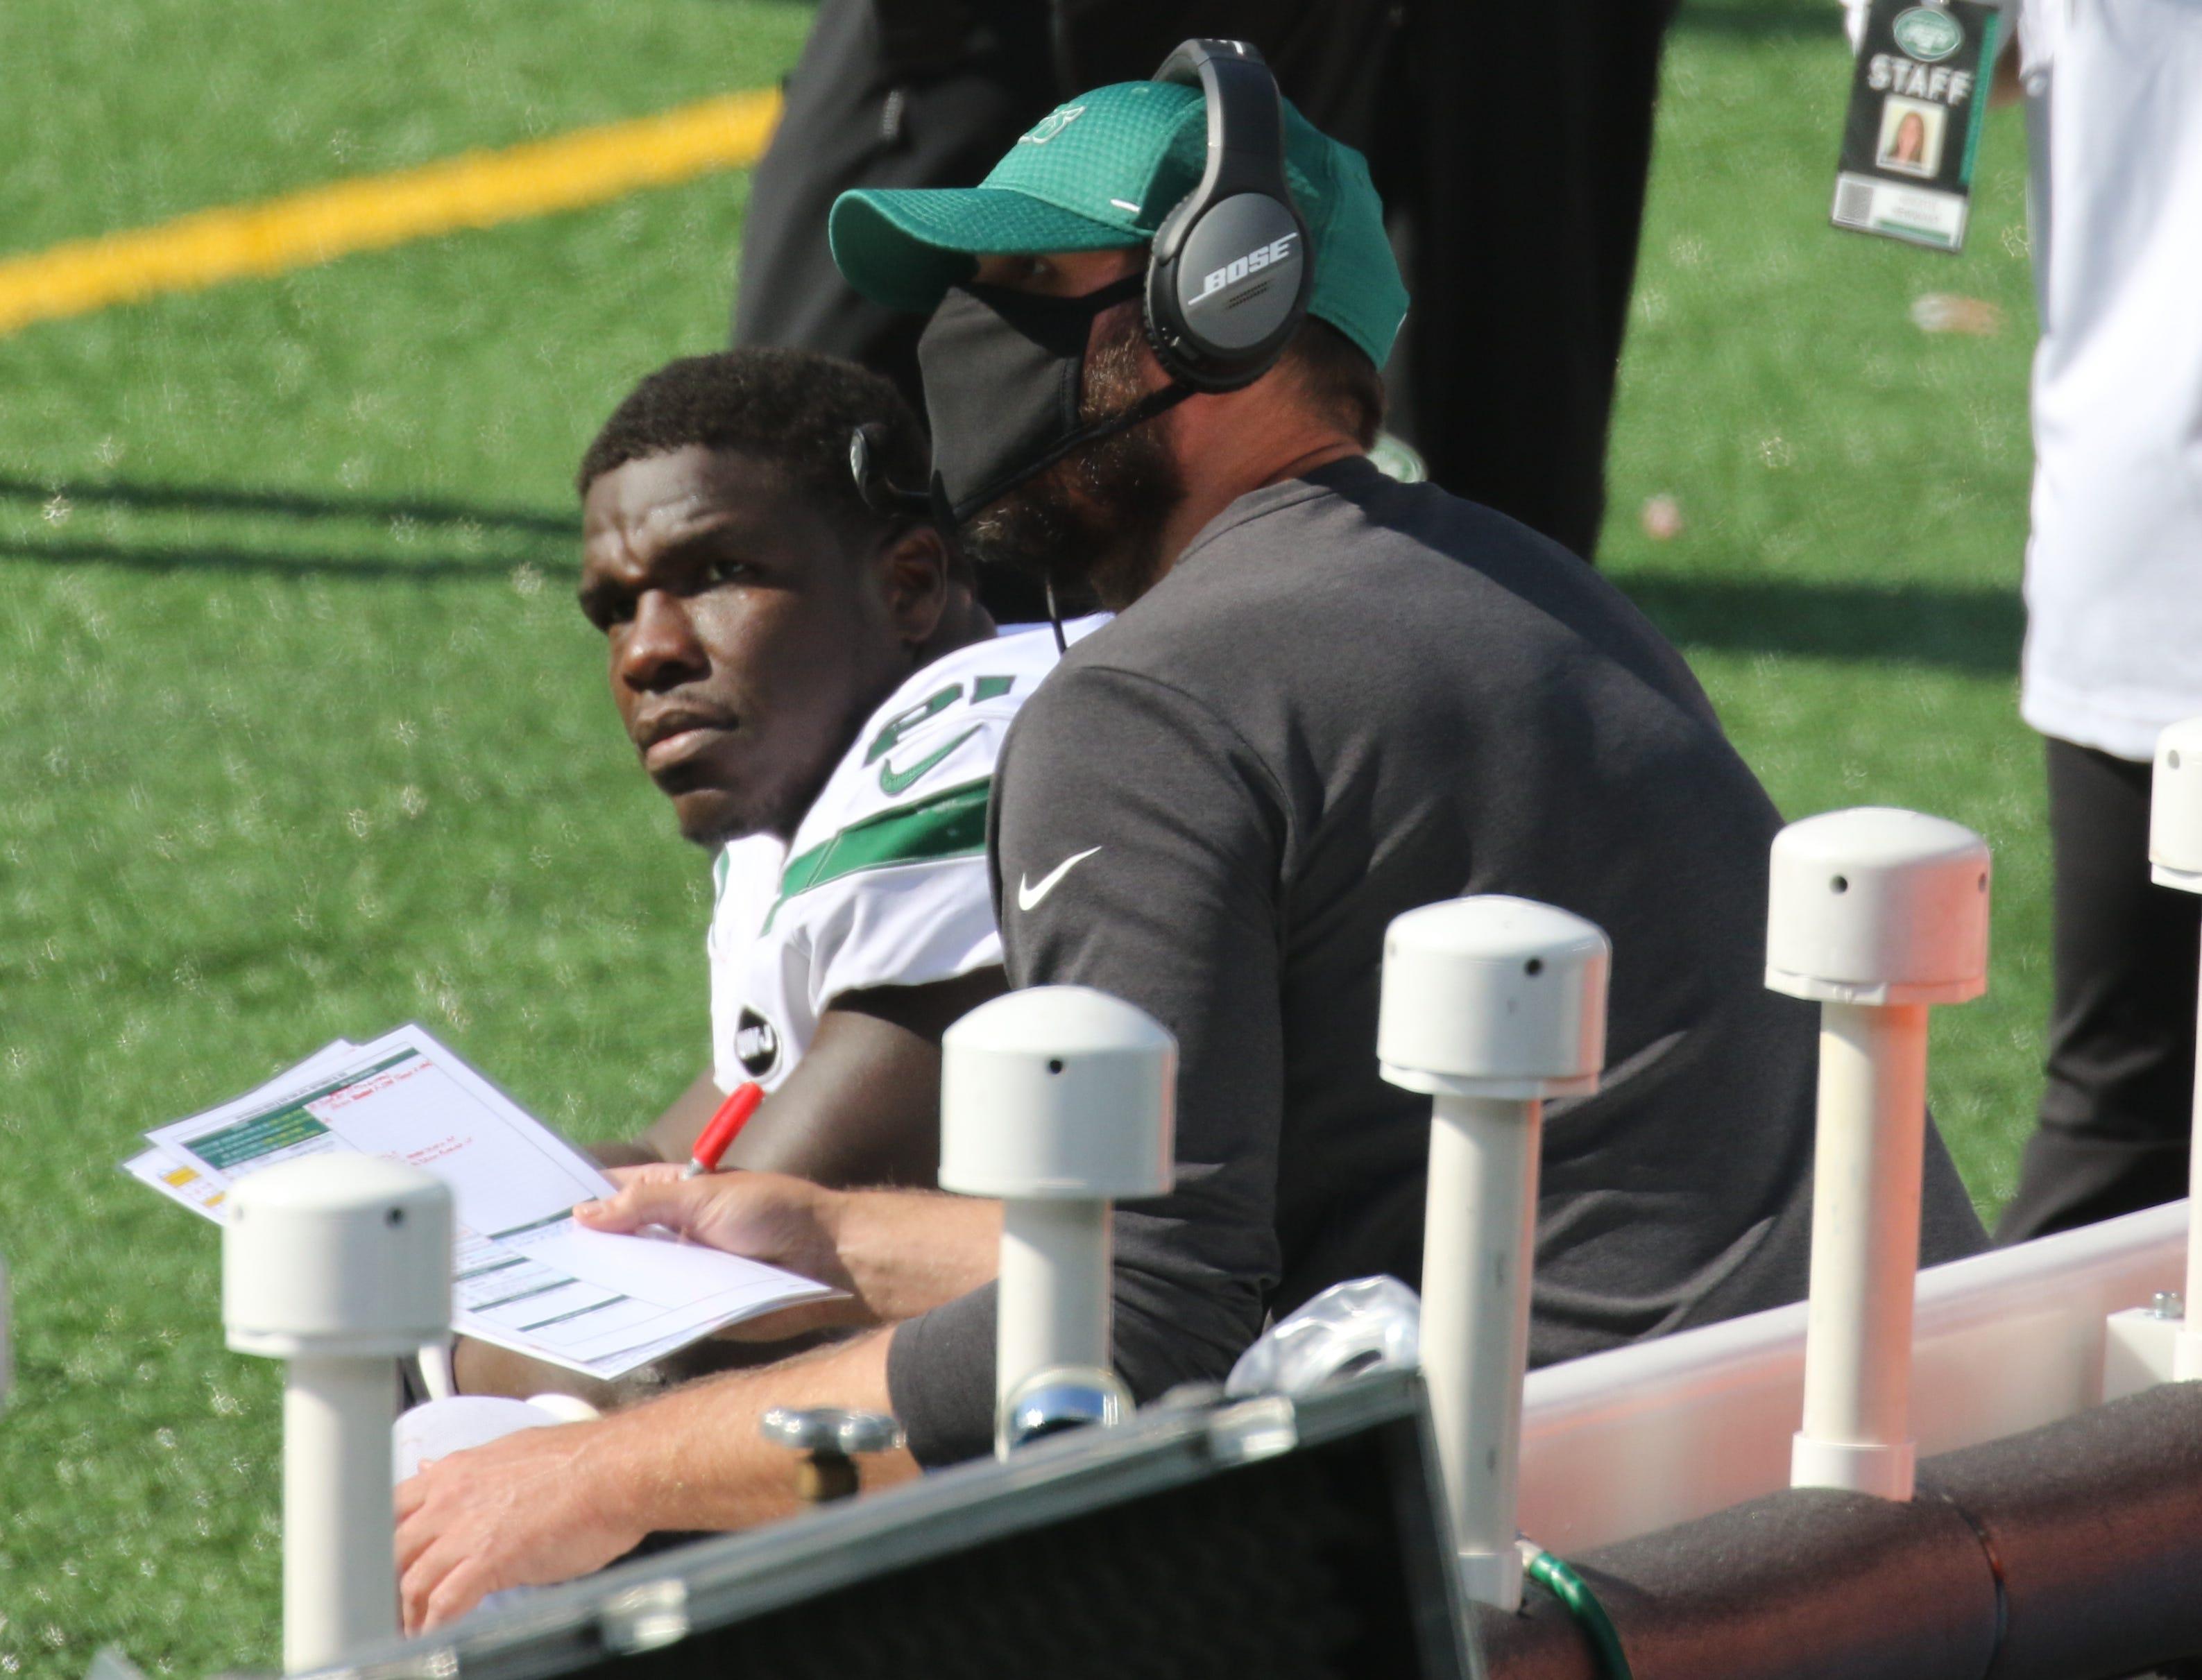 Frank Gore of the Jets on the sidelines with head coach Adam Gase in the second half as the San Francisco 49ers played New York Jets at MetLife Stadium in East Rutherford, NJ on September 20, 2020. The San Francisco 49ers Vs New York Jets At Metlife Stadium In East Rutherford Nj On September 20 2020 / © Chris Pedota, NorthJersey.com via Imagn Content Services, LLC